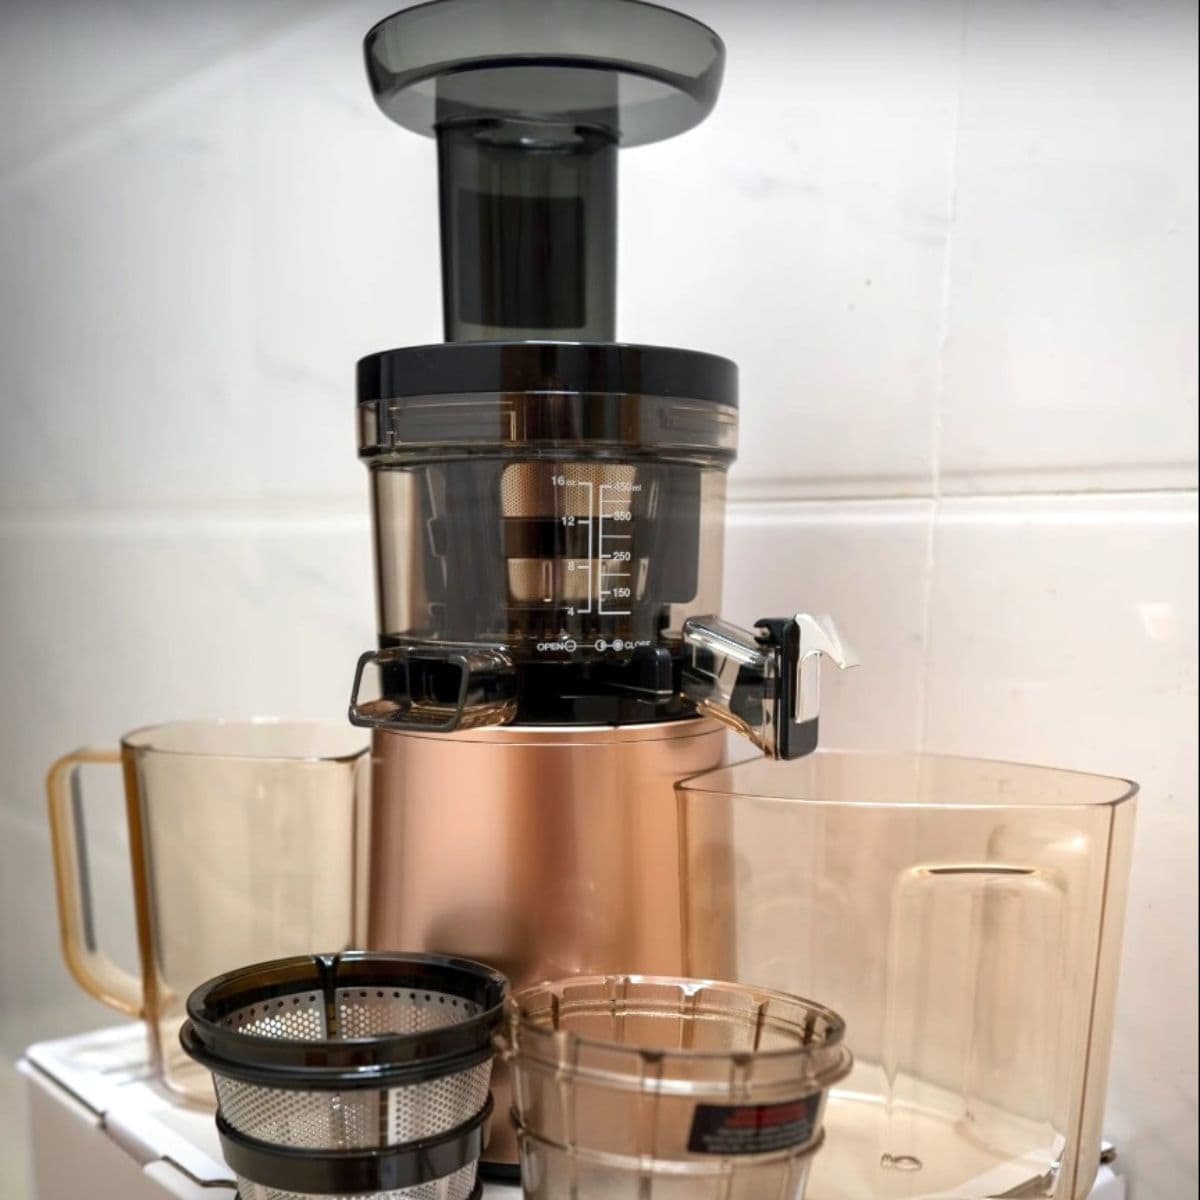 Hurom cold press juicer with all parts